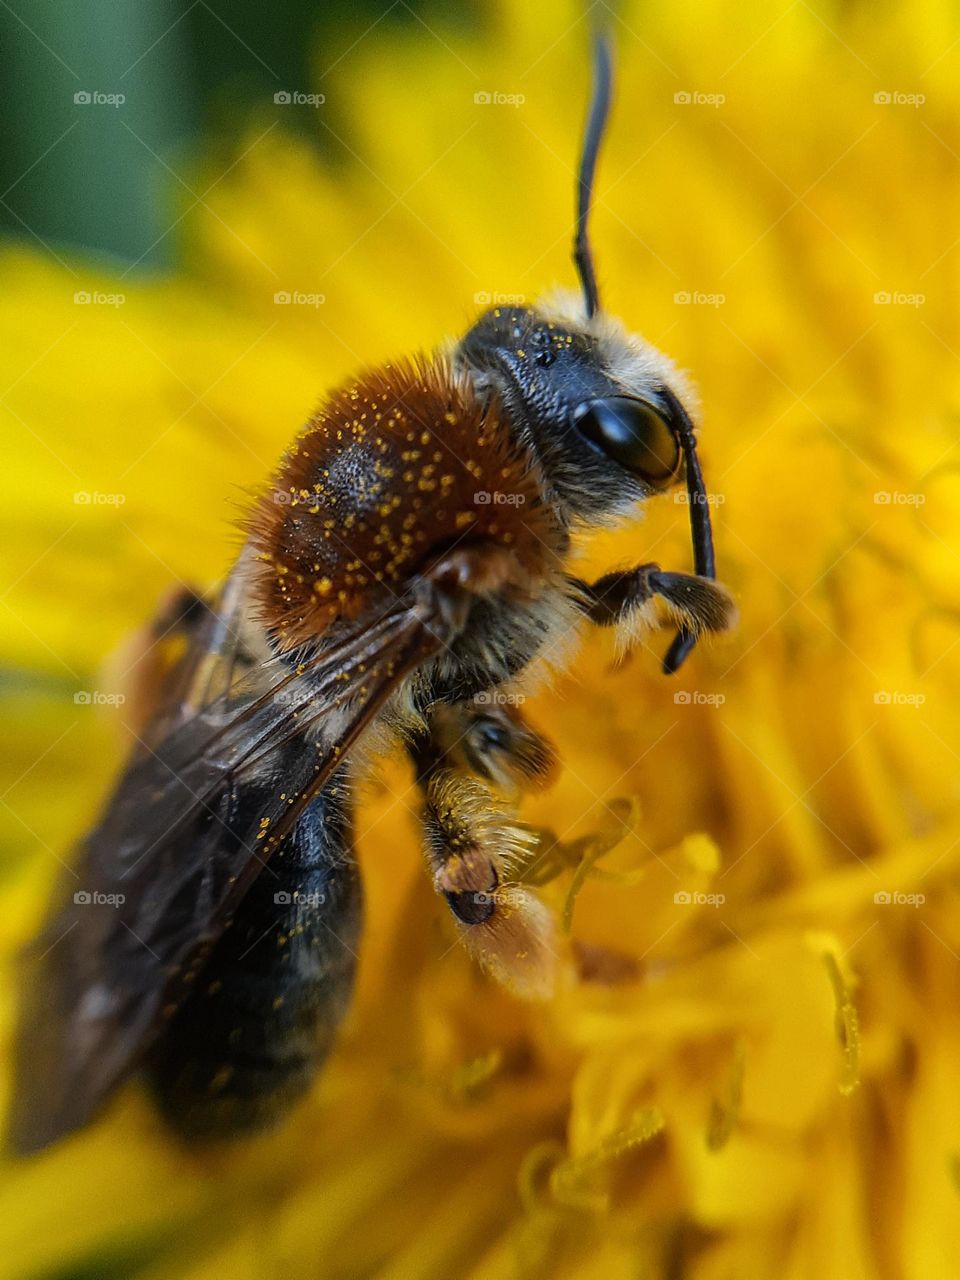 honey bee washes its face from pollen on a spring flower, namely a dandelion